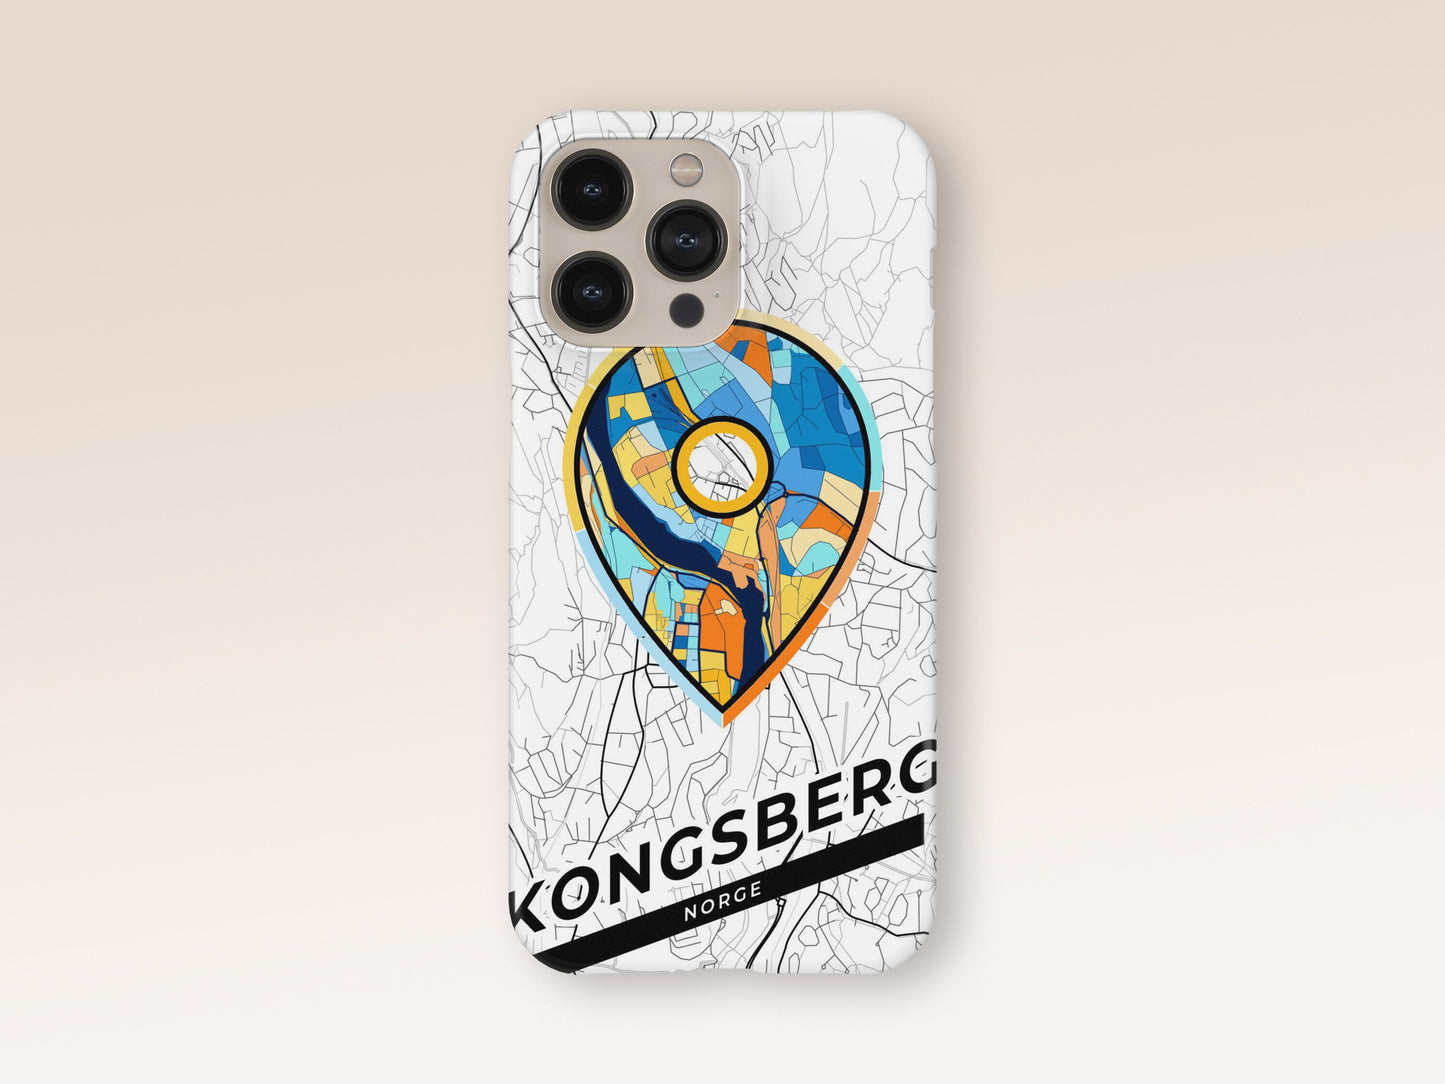 Kongsberg Norway slim phone case with colorful icon. Birthday, wedding or housewarming gift. Couple match cases. 1